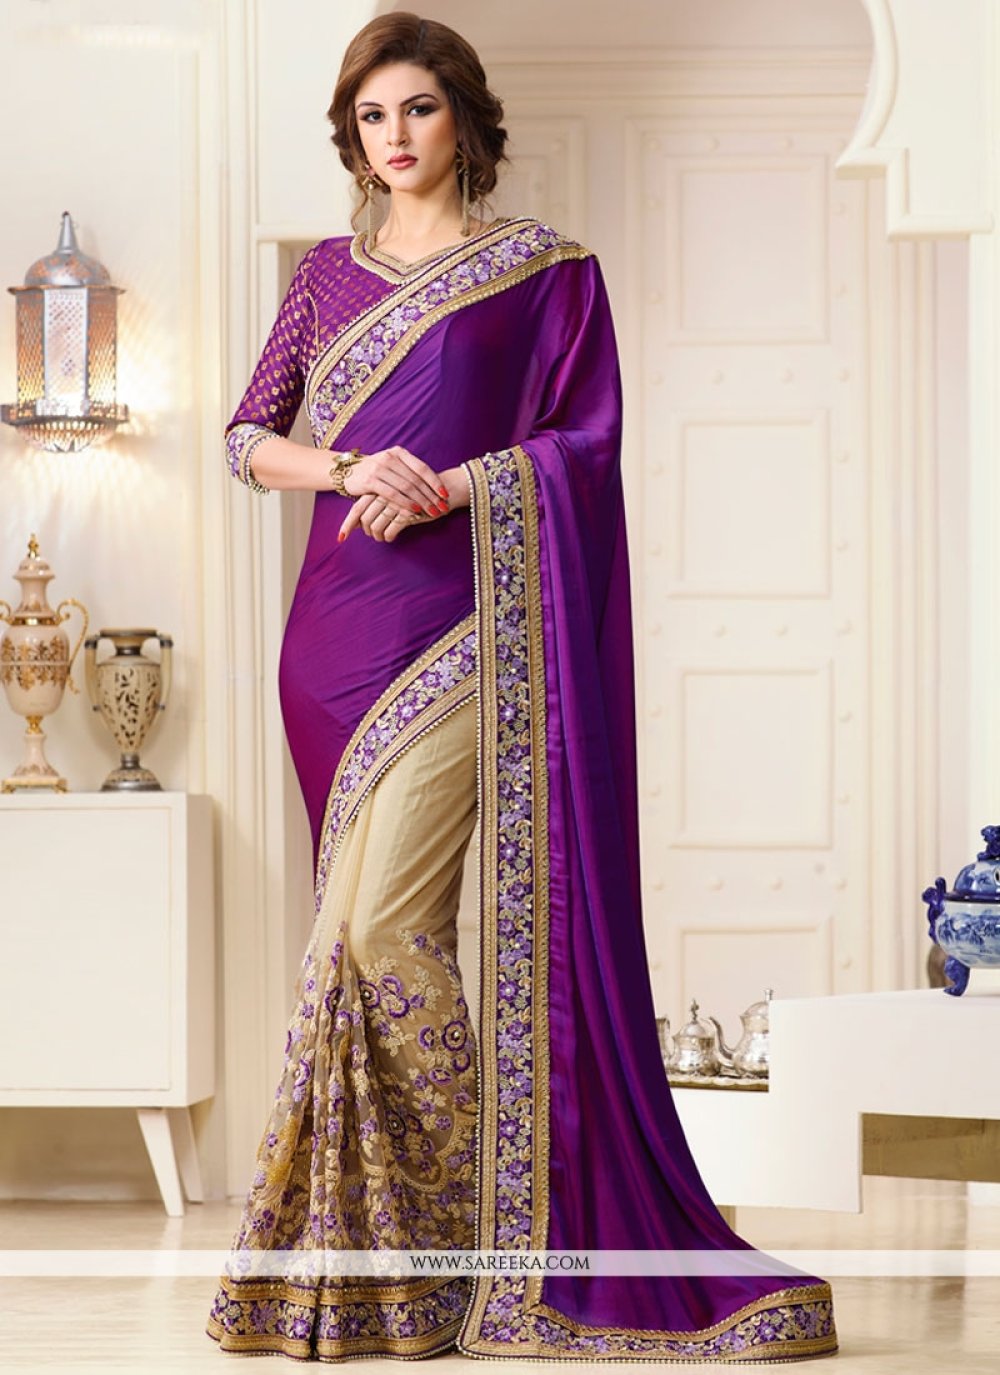 New Soft Georgette Designer Saree Online Shopping With Price